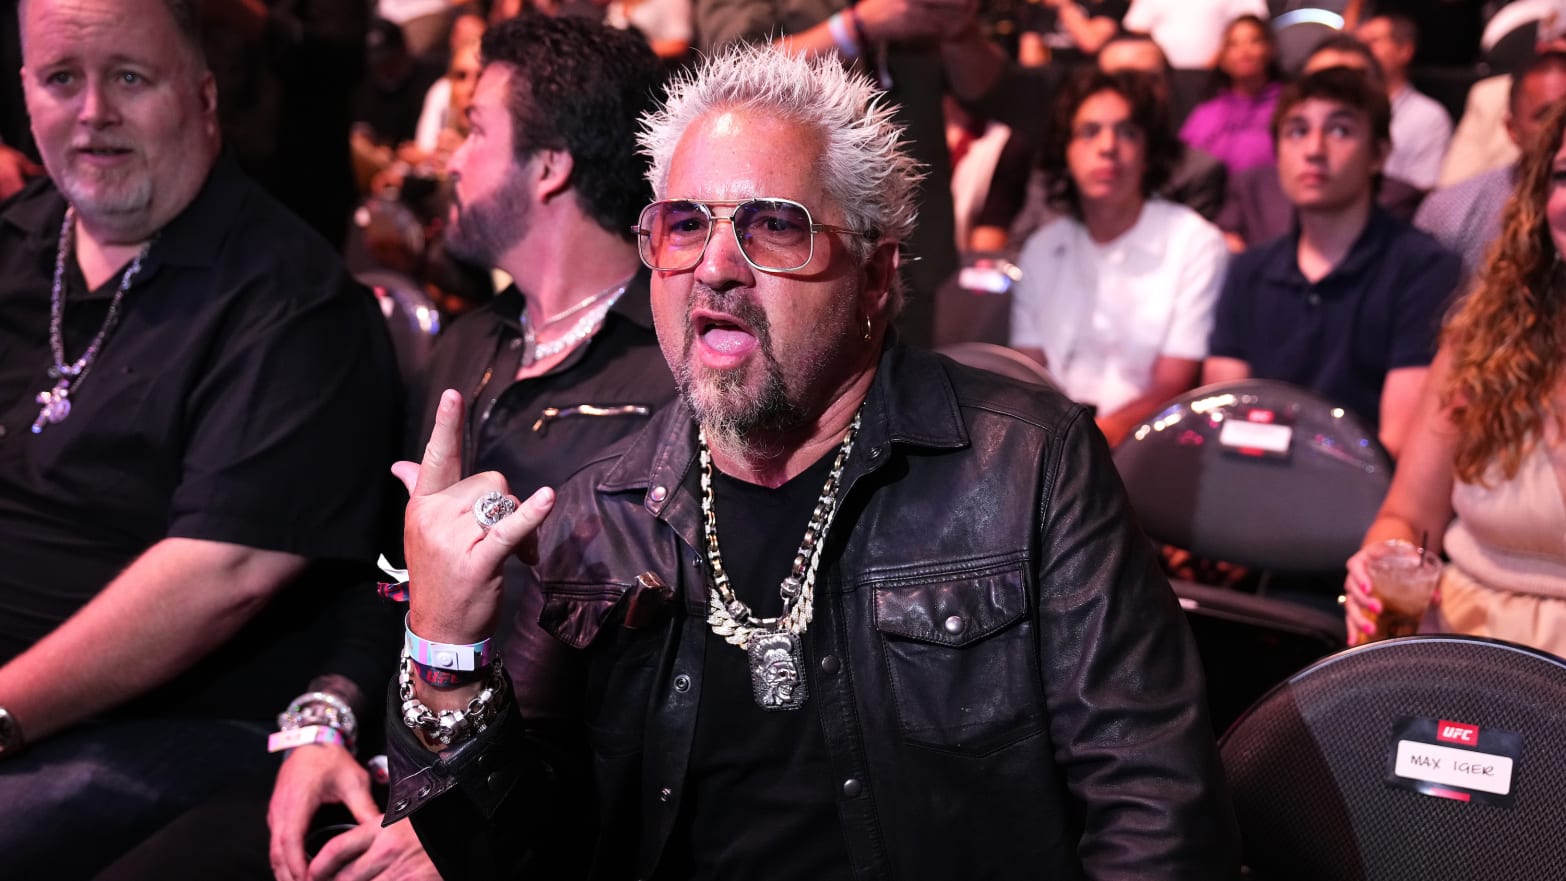 Guy Fieri at the UFC 290 event in Las Vegas.